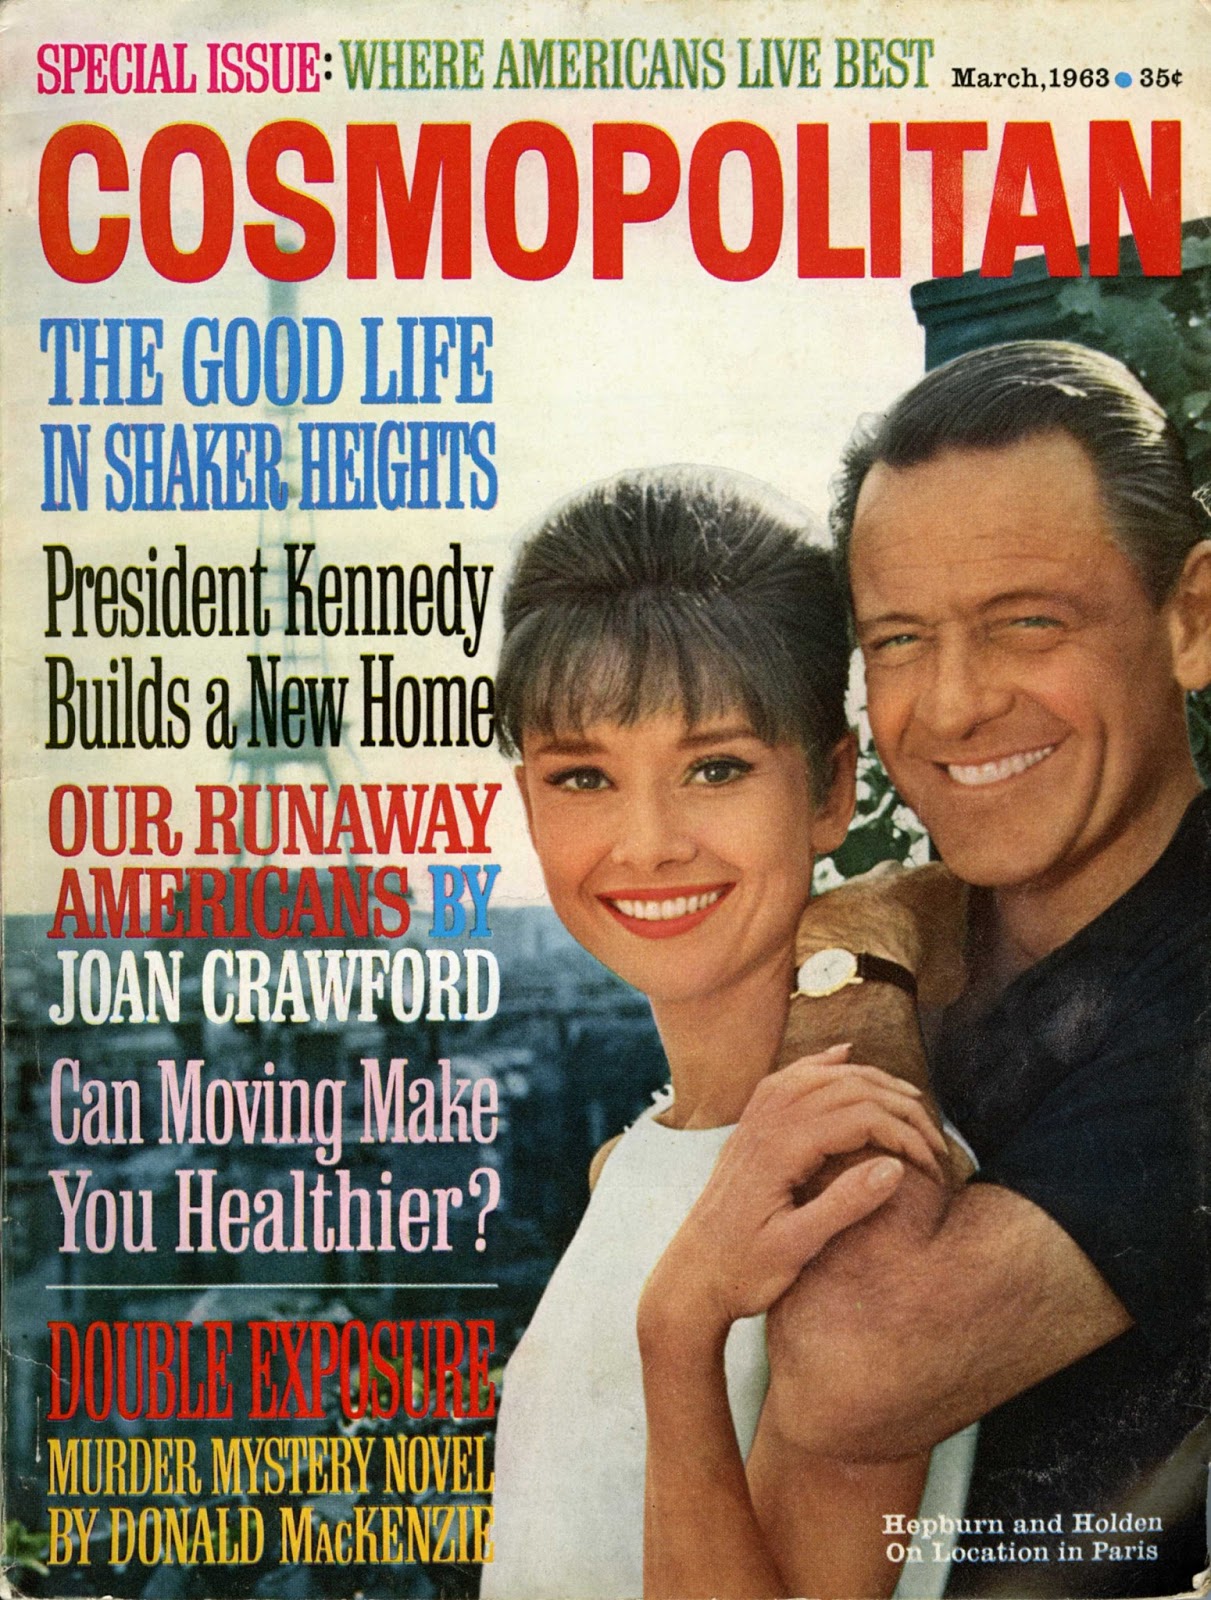 Movers and Shakers Archives - COMO Magazine